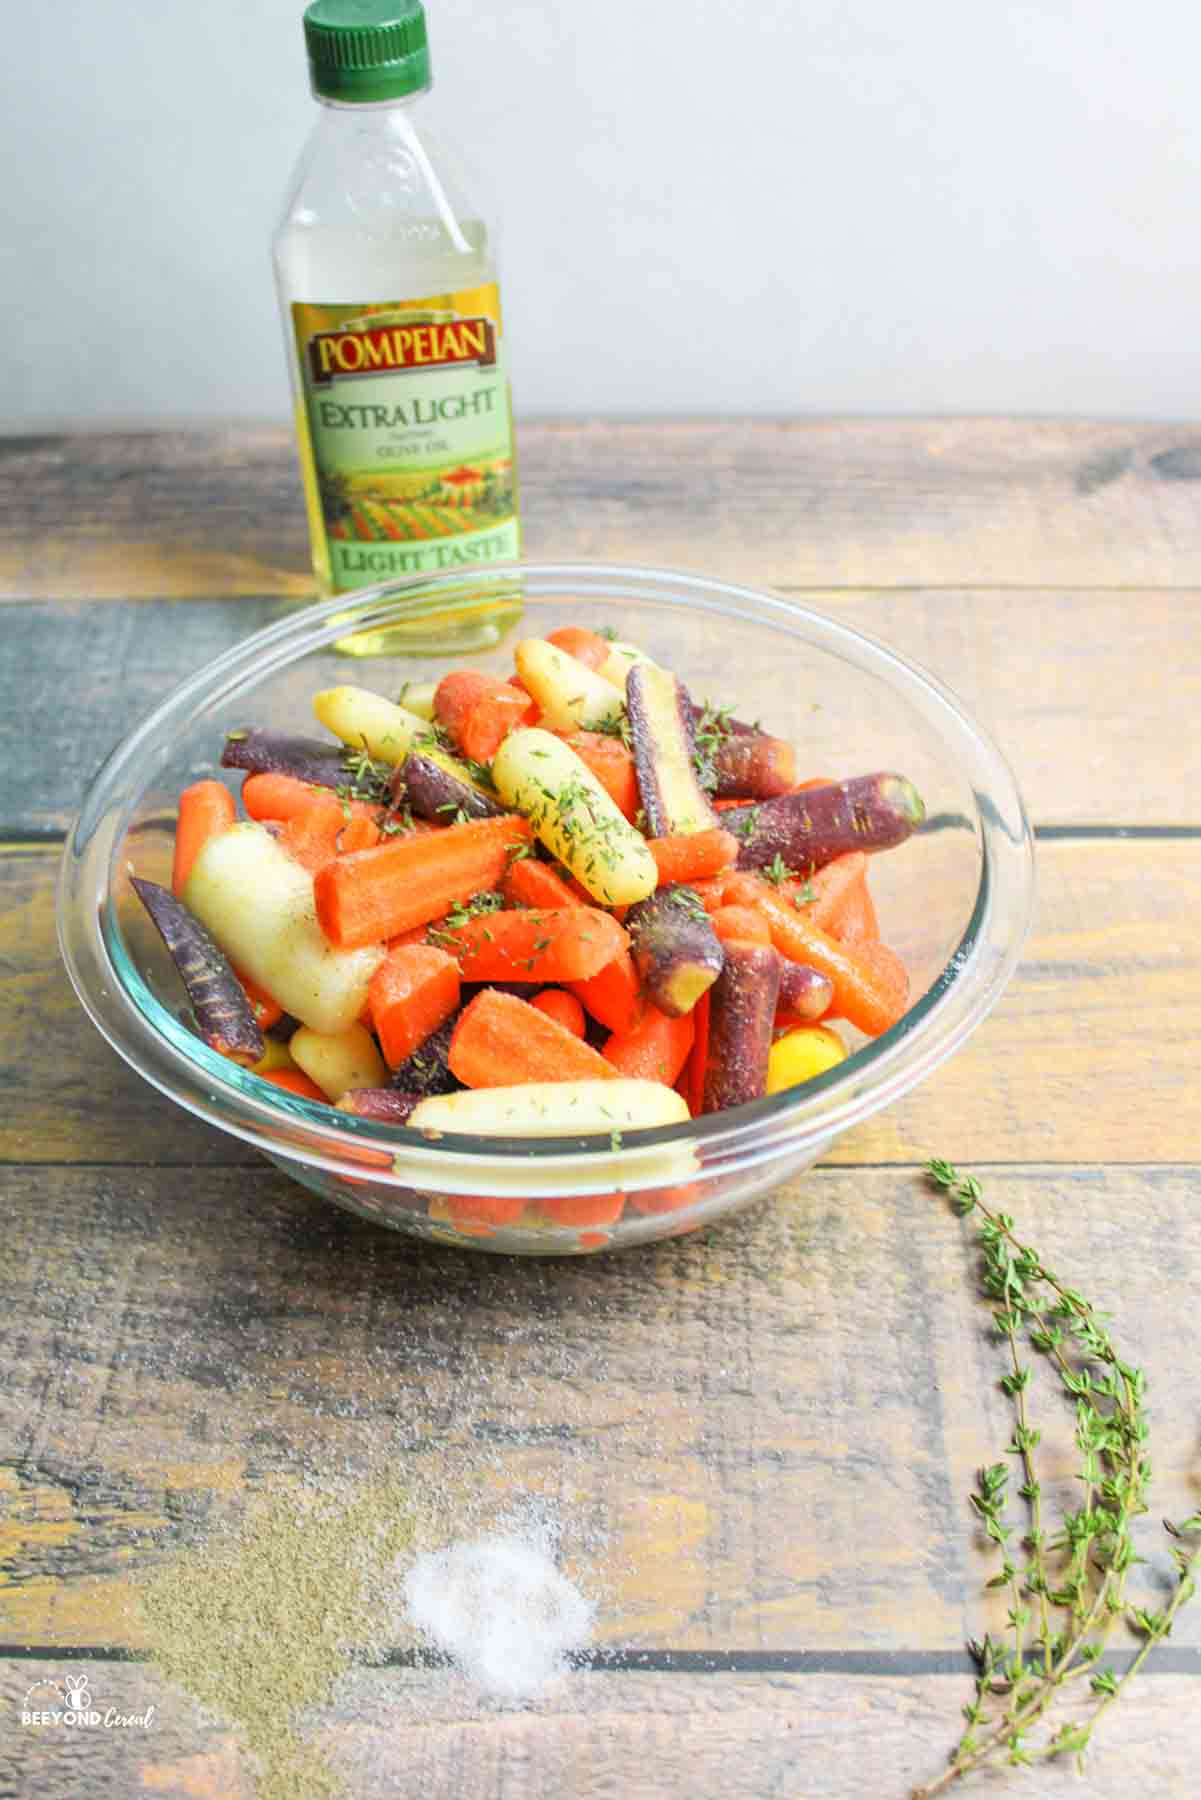 seasonings added to baby carrots in a bowl